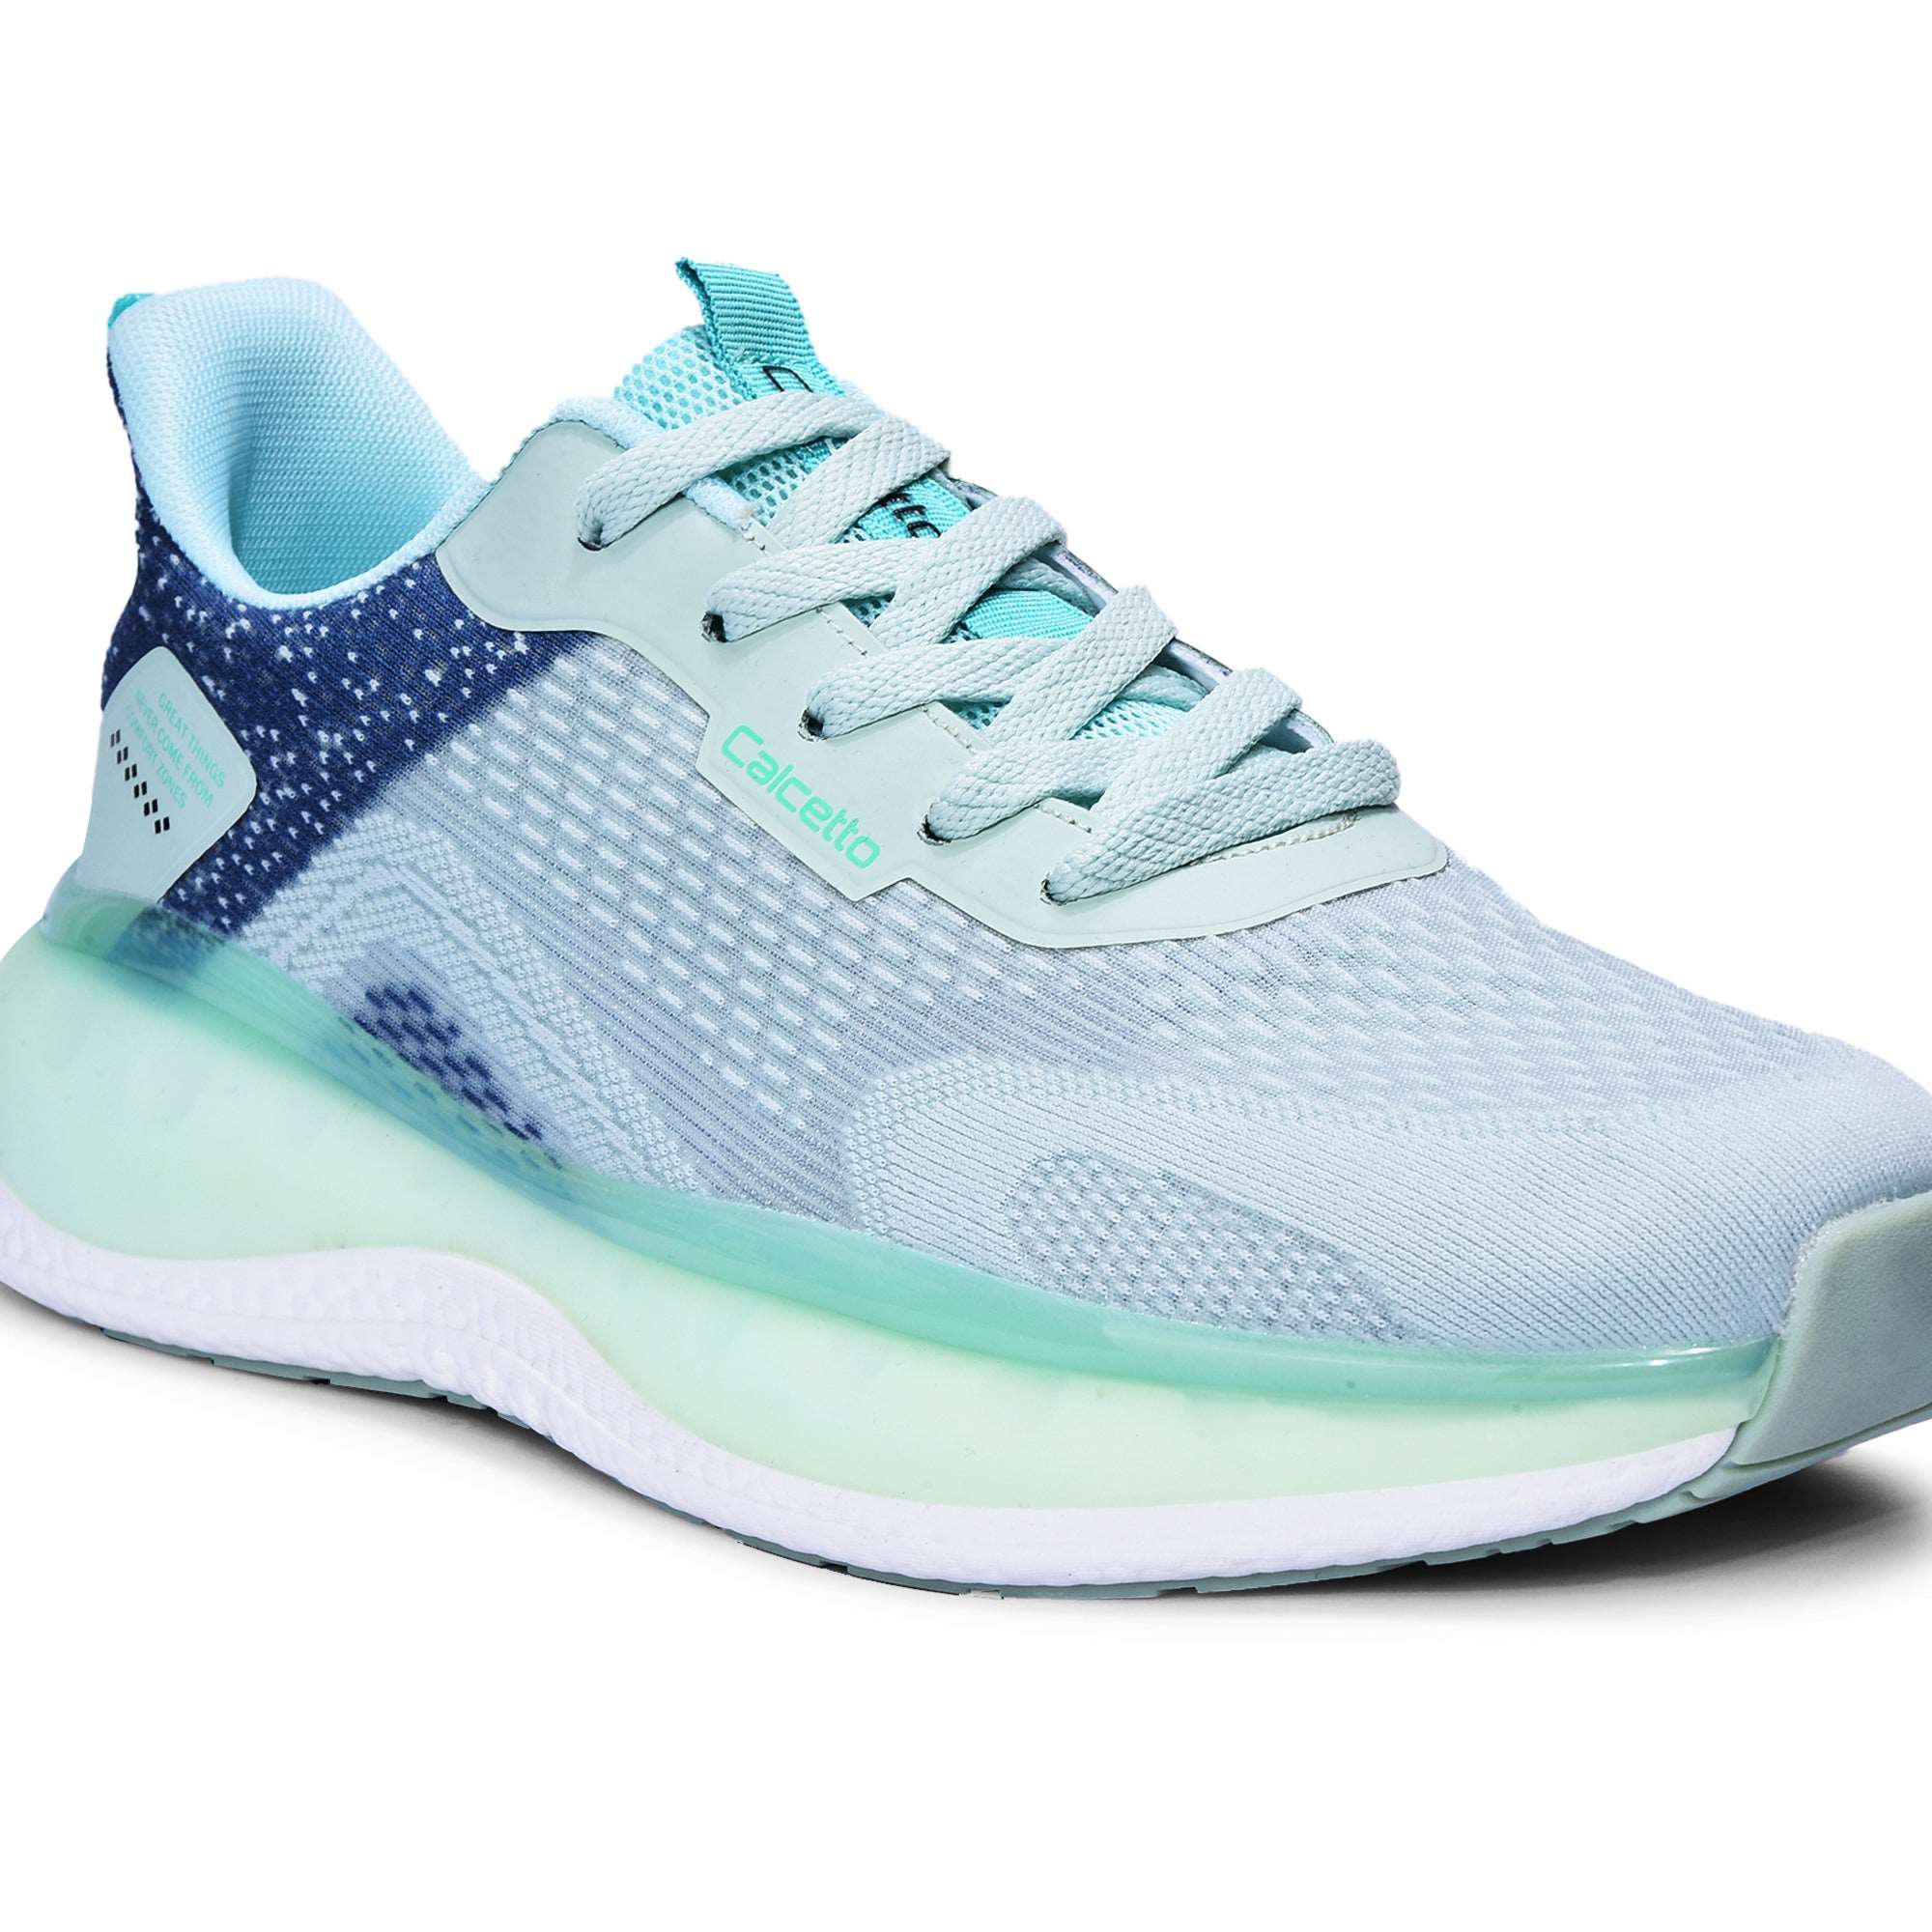 Calcetto CLT-0986 Green Blue Running Sports Shoe For Men